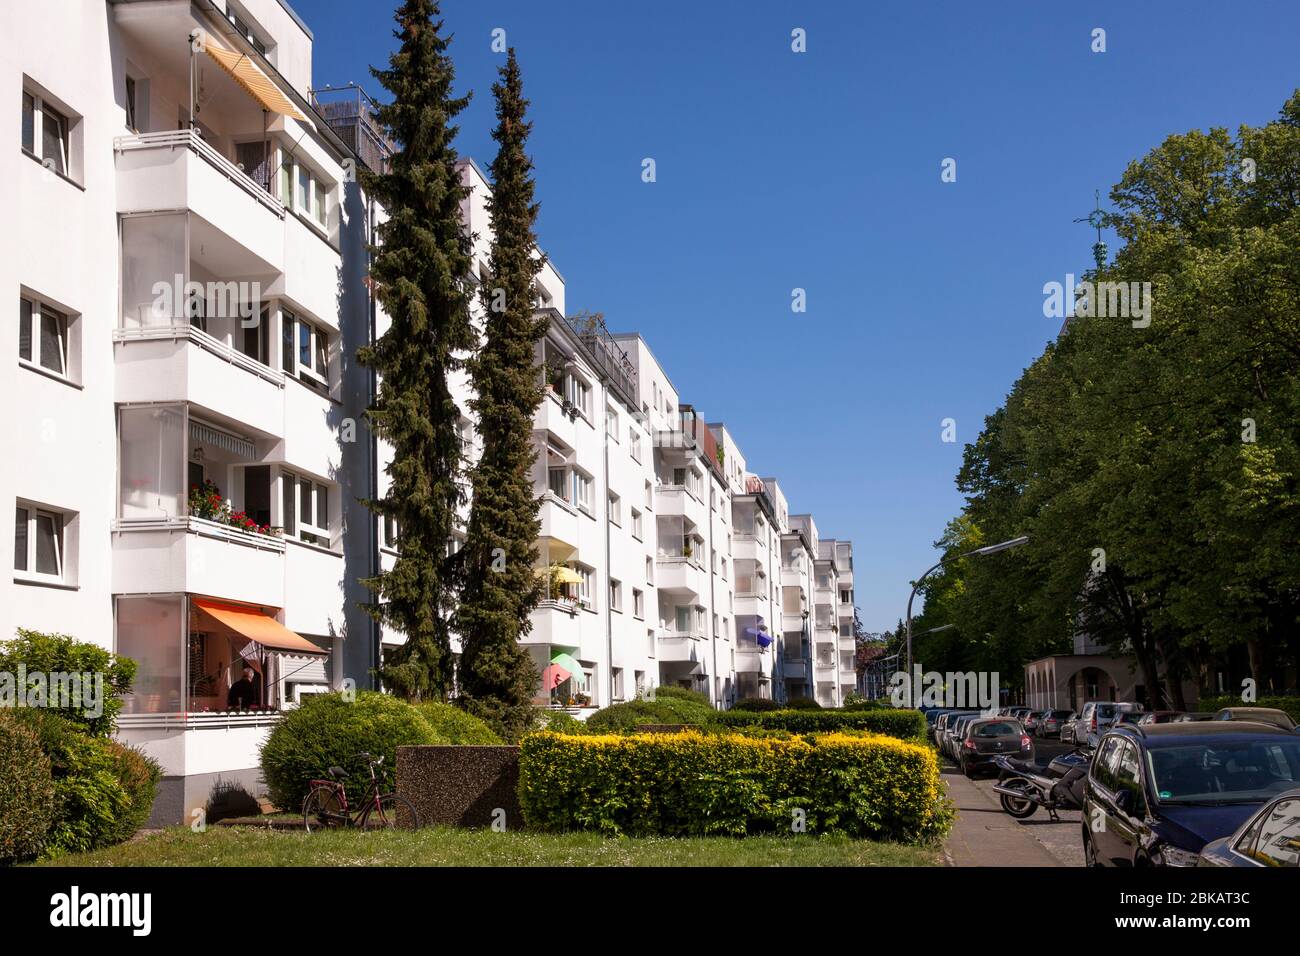 the housing estate Weisse Stadt in the district-Buchforst, built 1929-32 according to plans by Wilhelm Riphan and Caspar Maria Grod, Cologne, Germany. Stock Photo